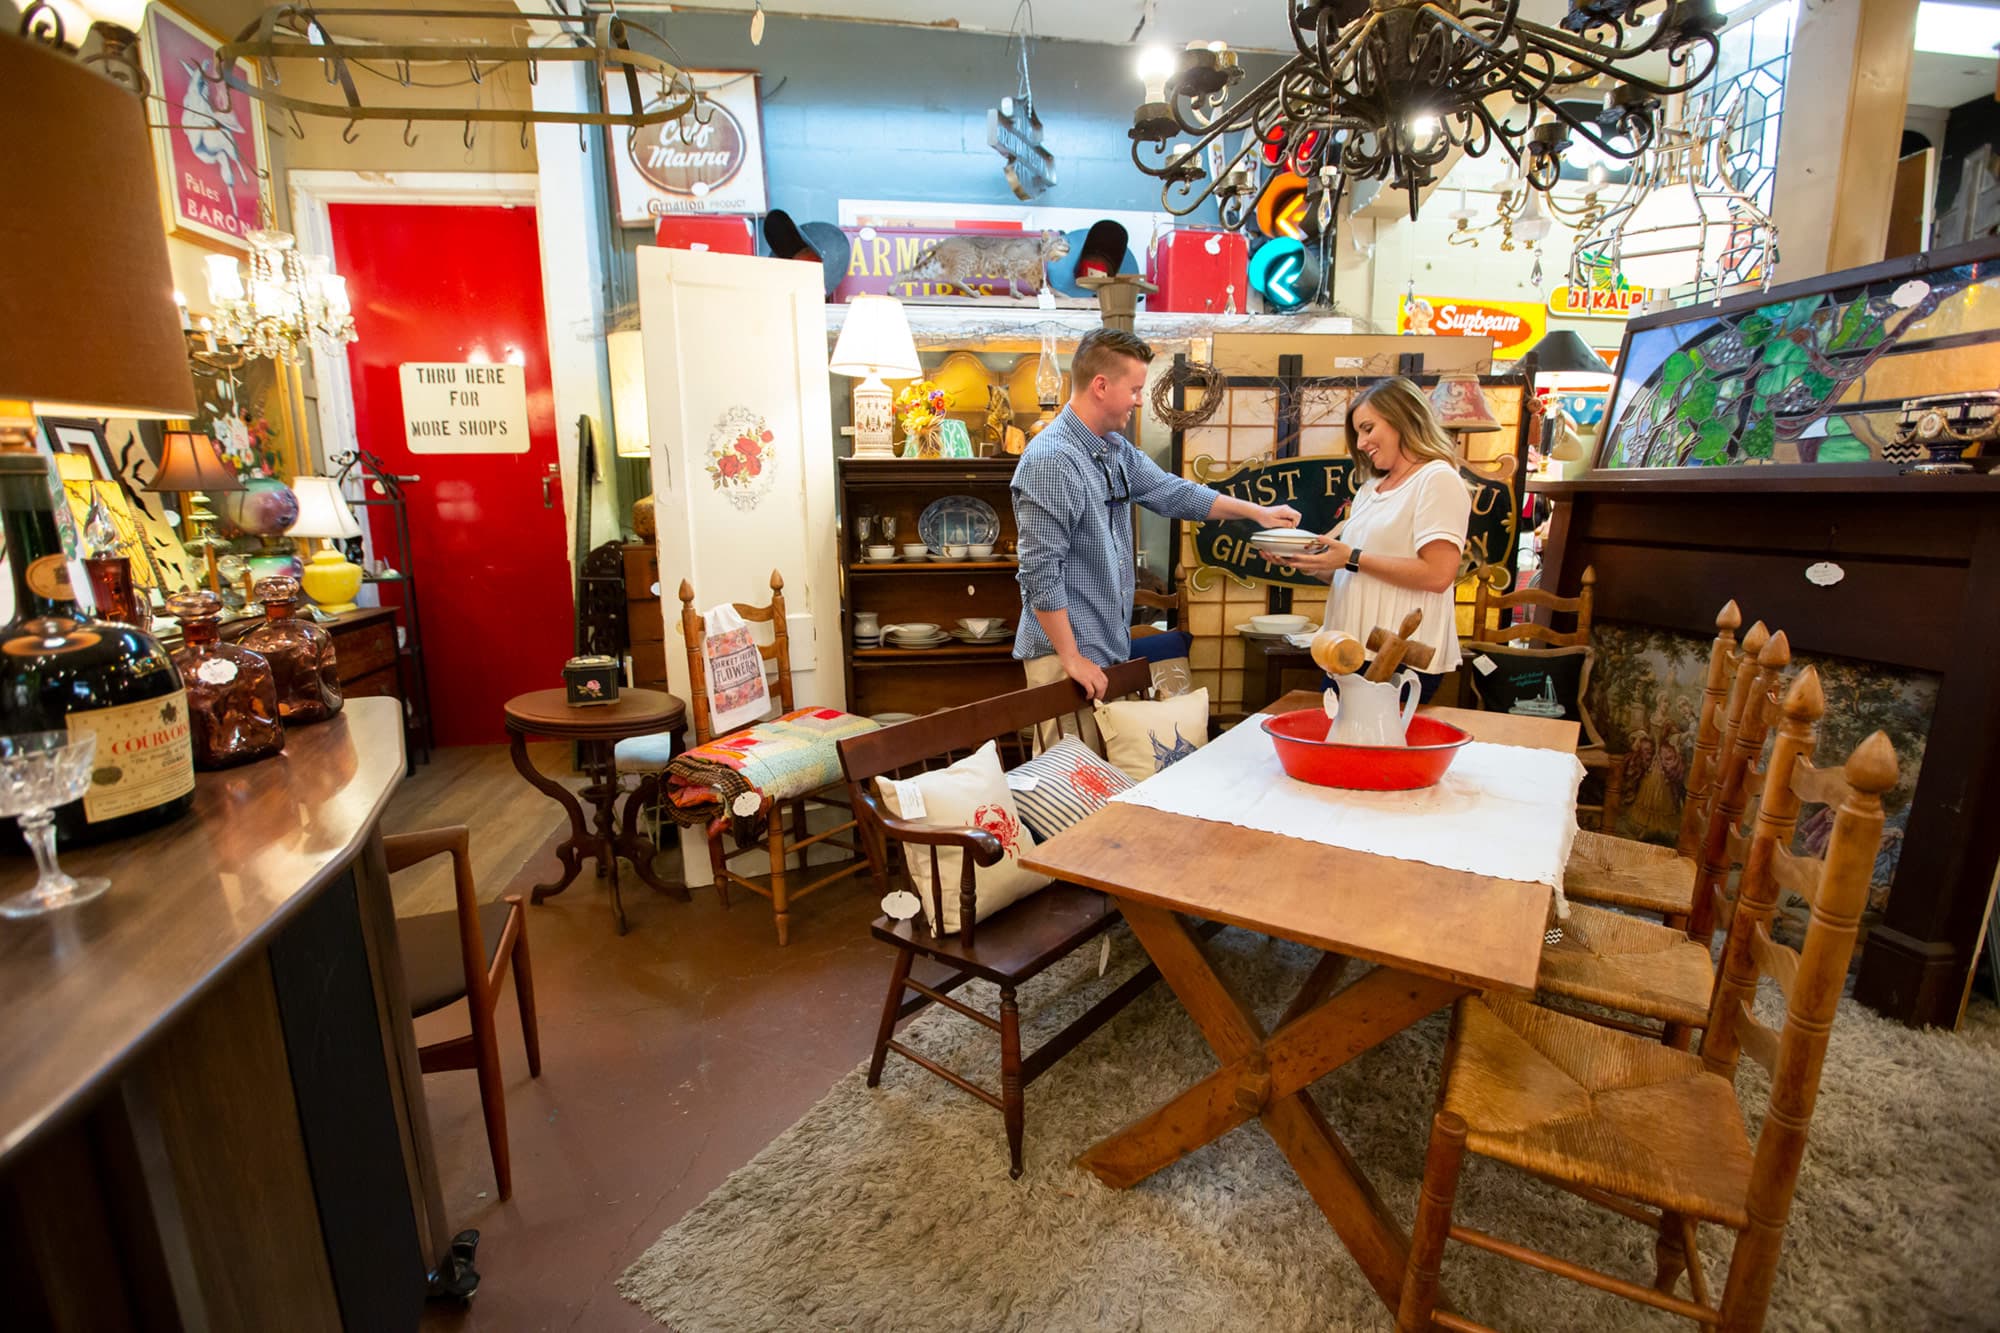 Couple looking at stoneware inside Dixieland Relics in Lakeland, FL. Home decor and antique furniture on display throughout room.